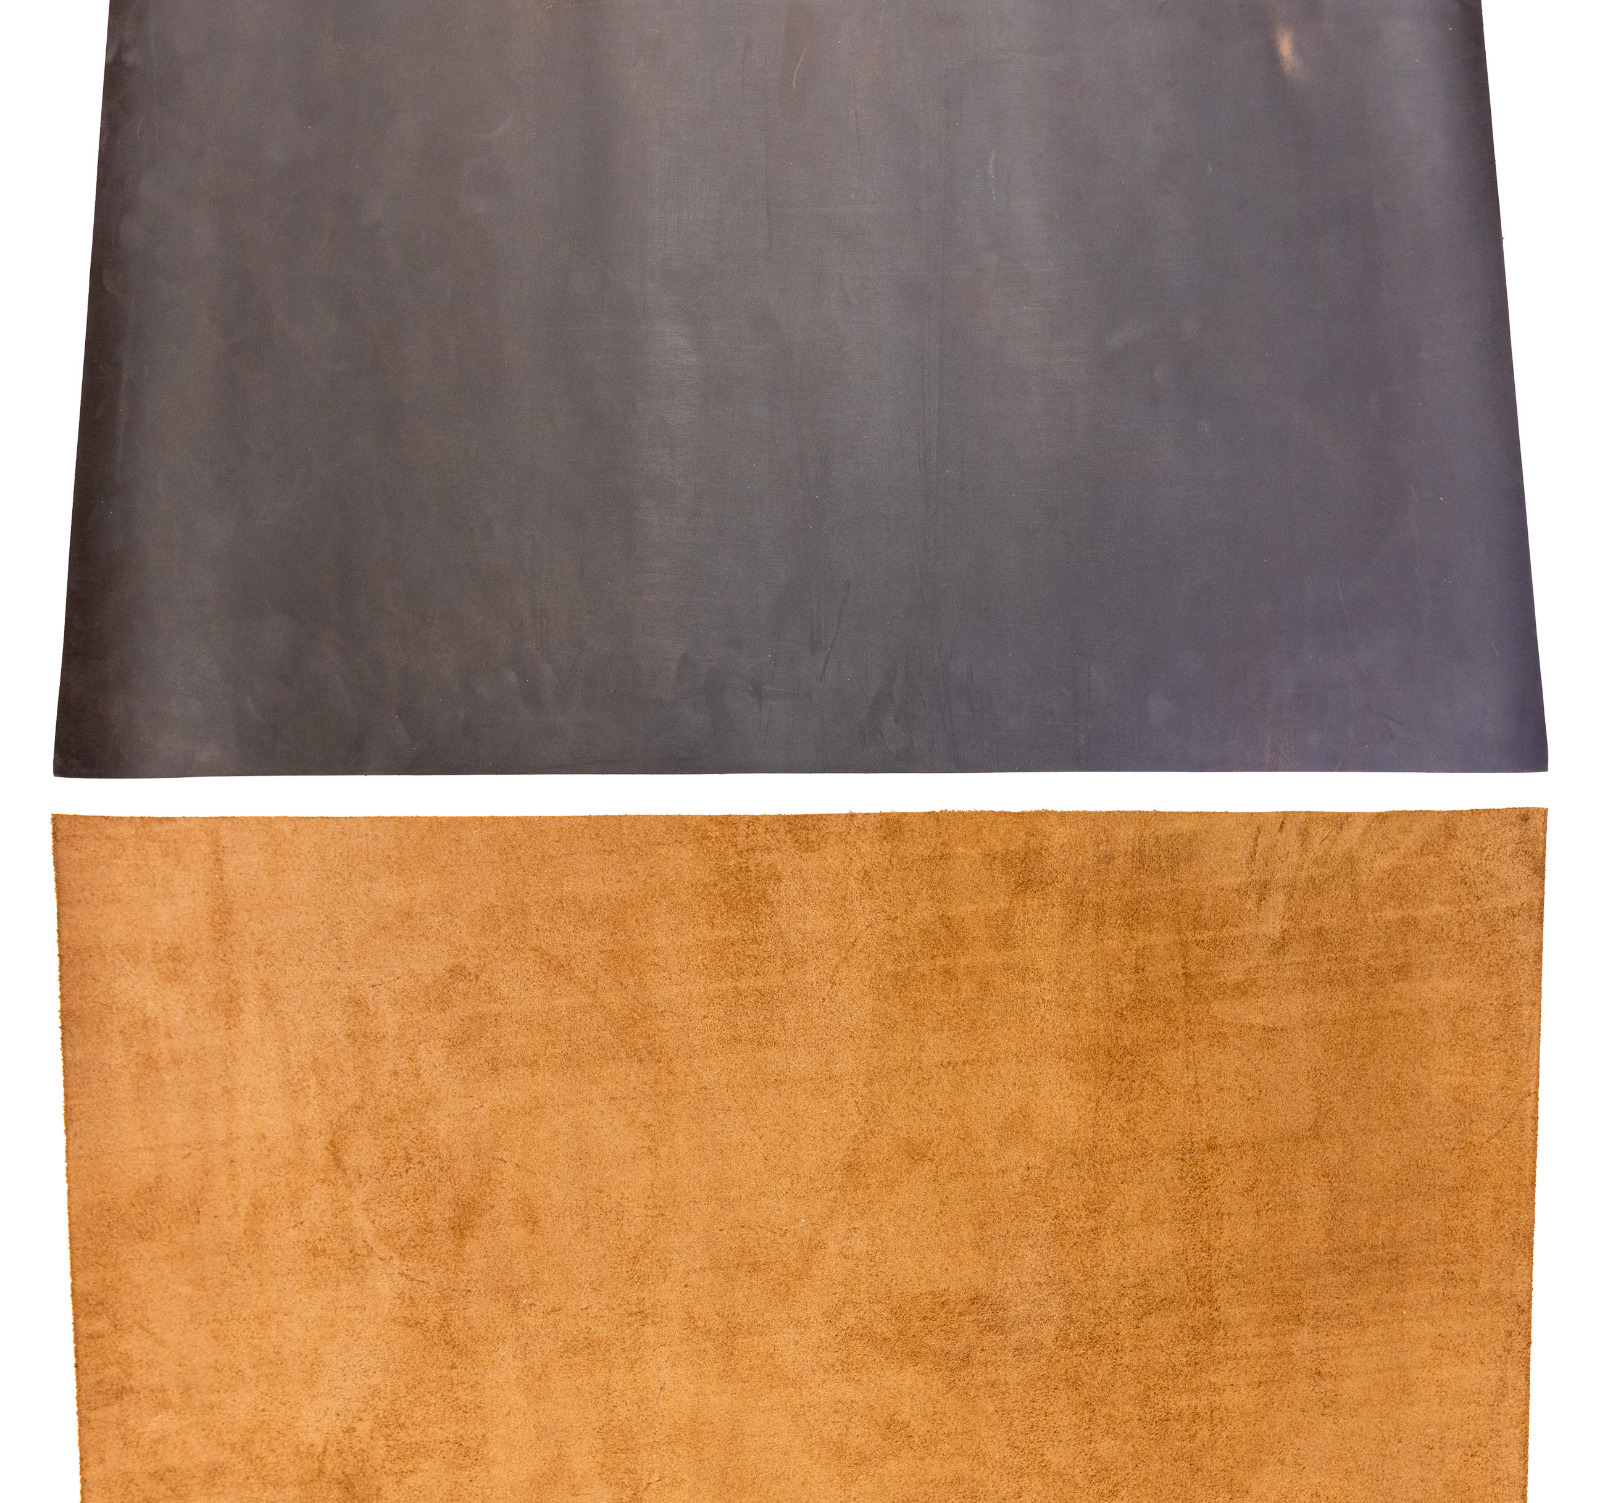 SLC Sable Dark Brown Oil Tan Leather Sheets 2mm Thick 5/6 Ounce